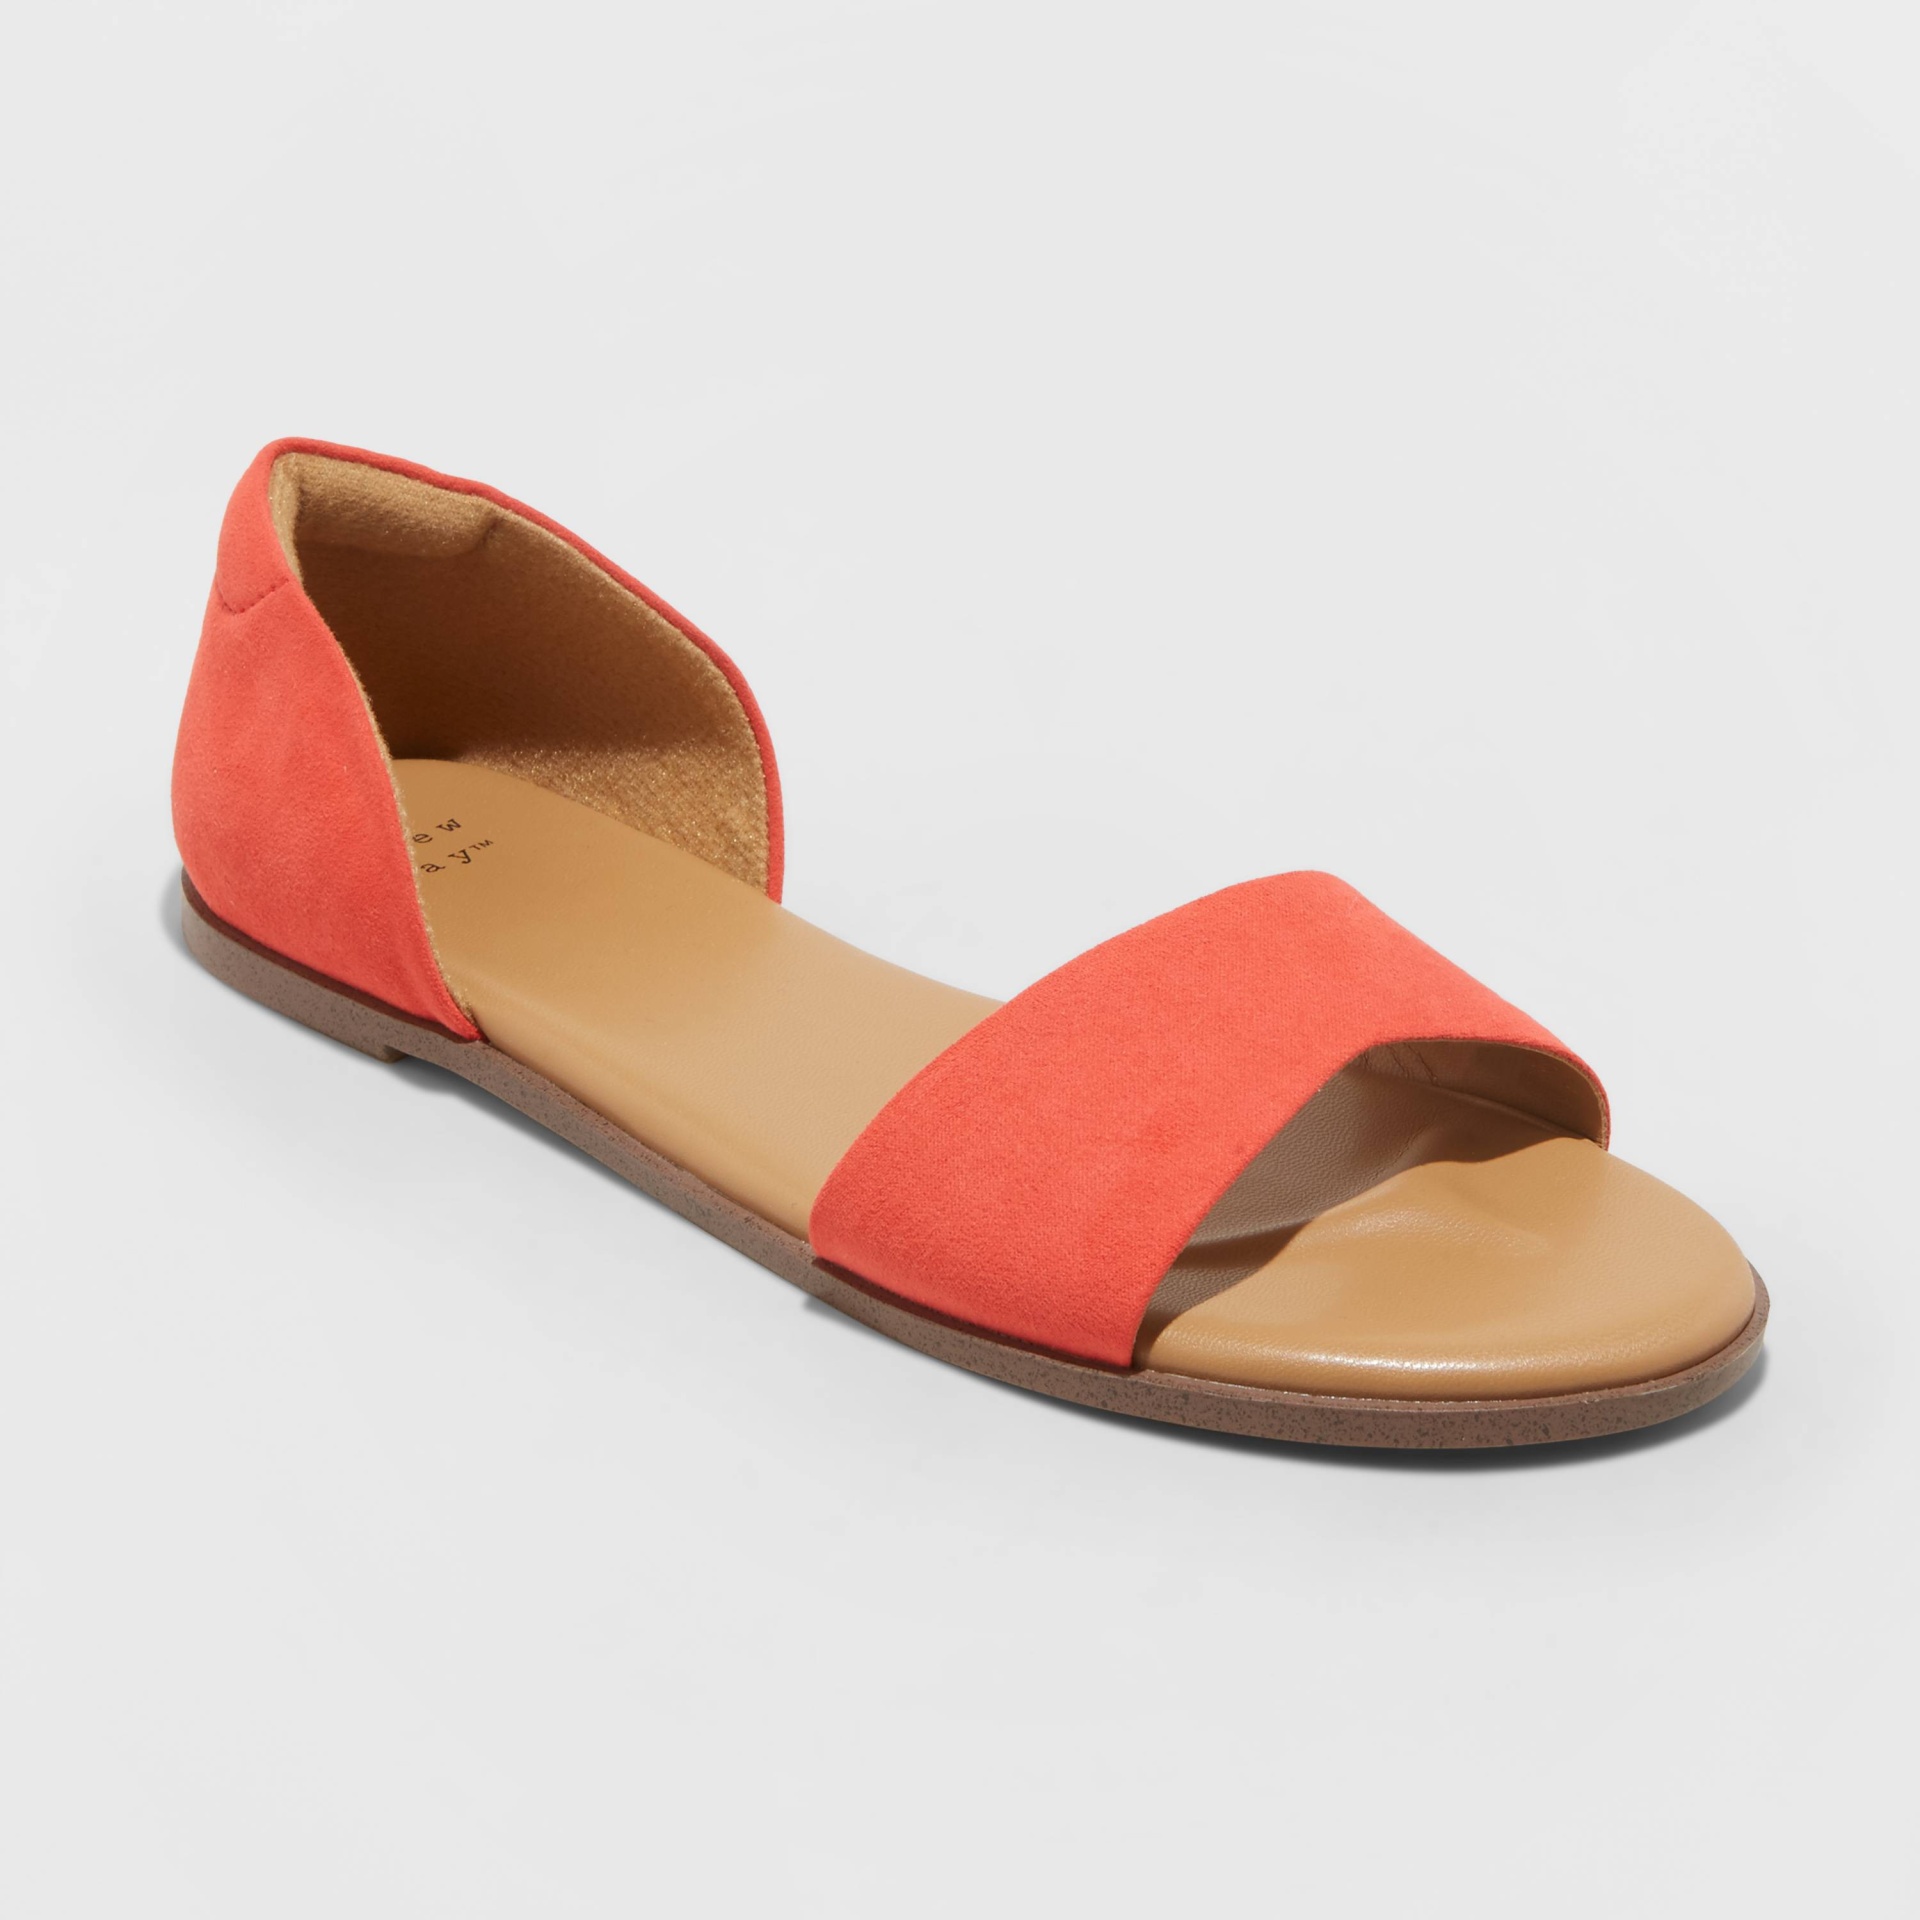 slide 1 of 4, Women's Ann Two Piece Slide Sandals - A New Day Coral 6, 1 ct